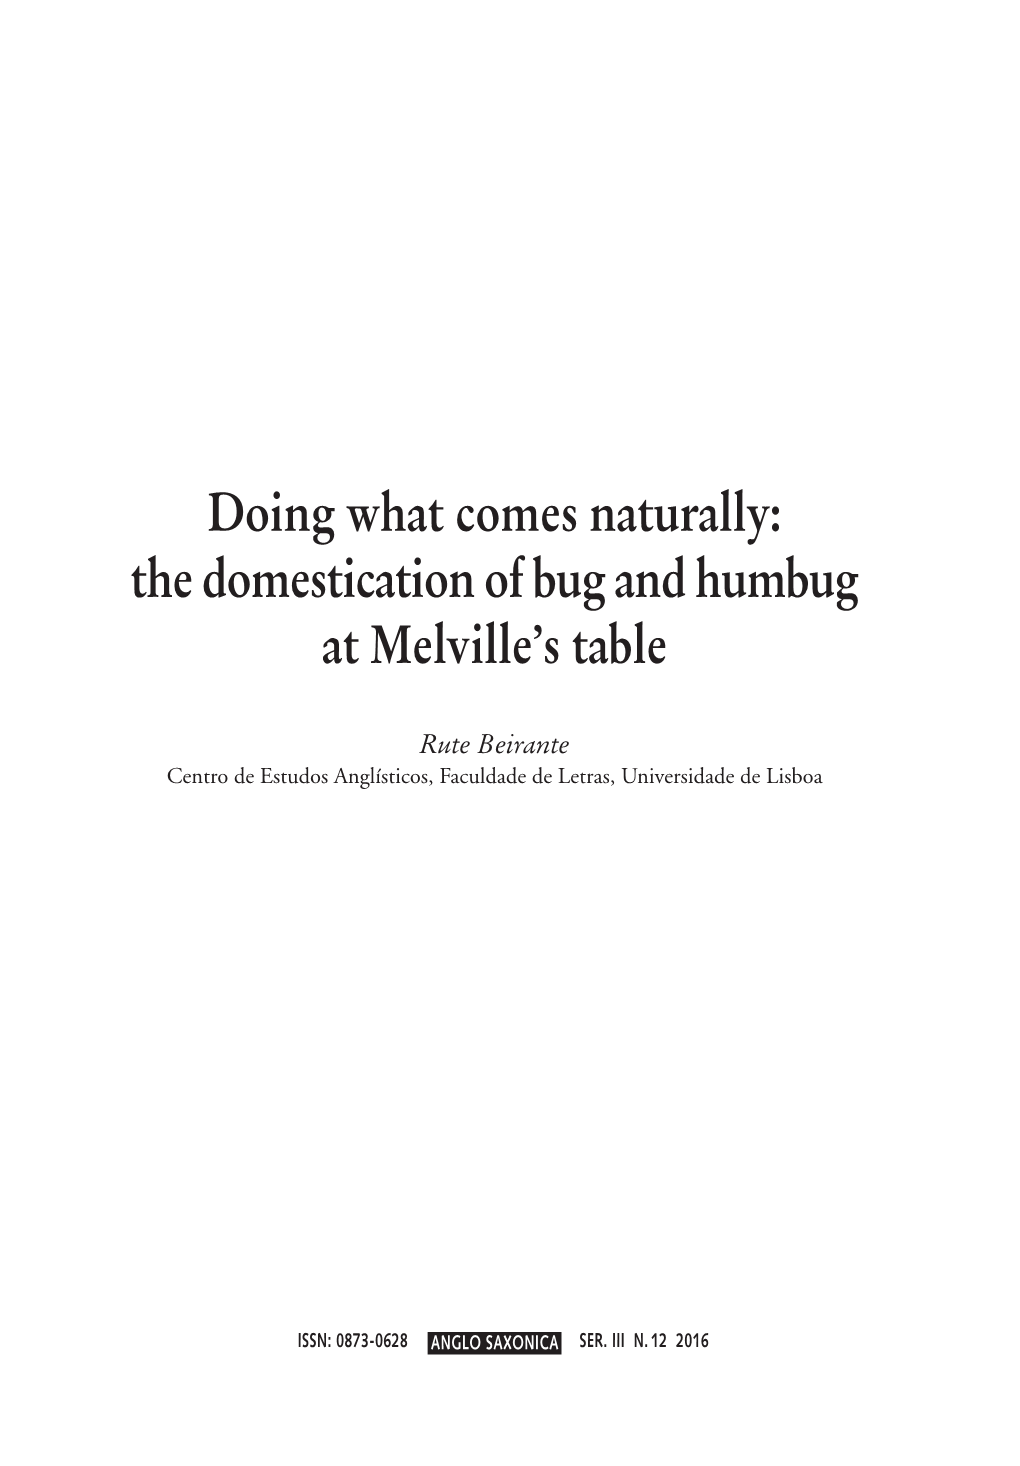 The Domestication of Bug and Humbug at Melville's Table